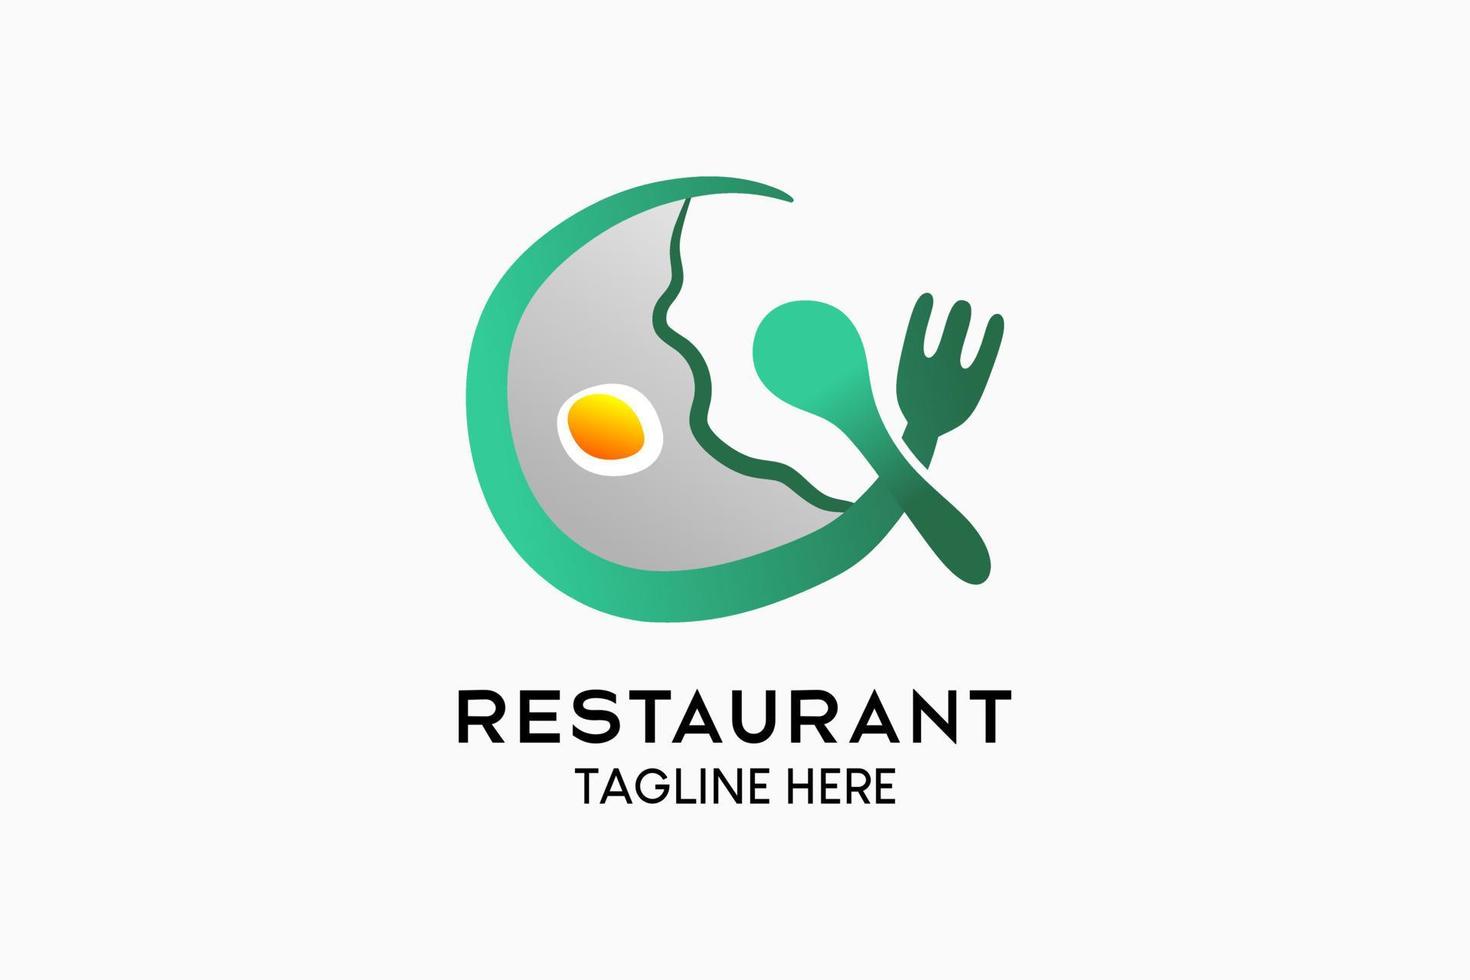 Restaurant logo design with creative hand drawing concept, spoon and fork combined with egg icon in a circle. Modern vector illustration